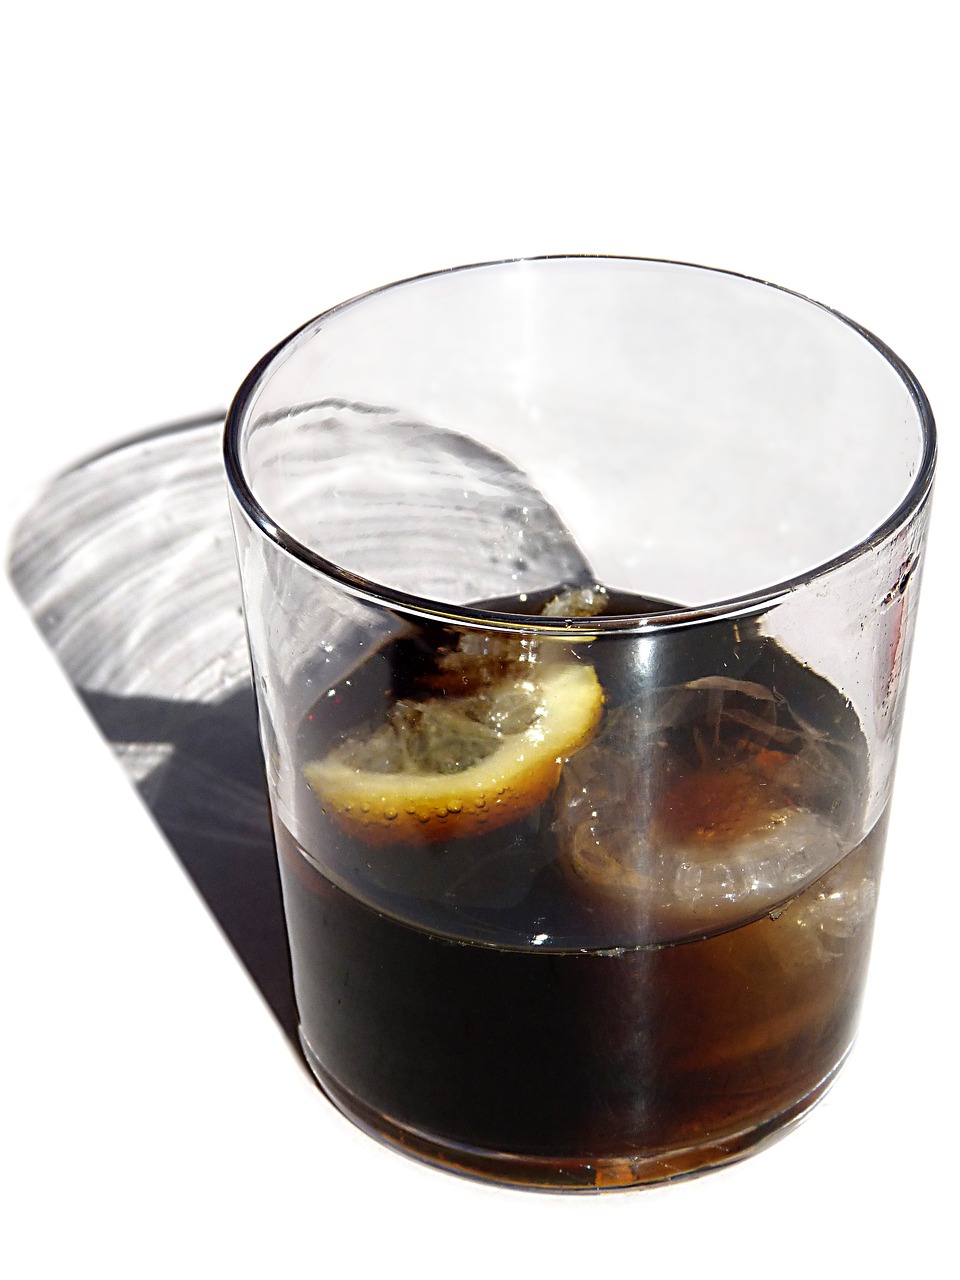 a glass of soda with a lemon slice in it, inspired by Kōno Michisei, flickr, dada, ice coffee, amaro, cnn, sfw version